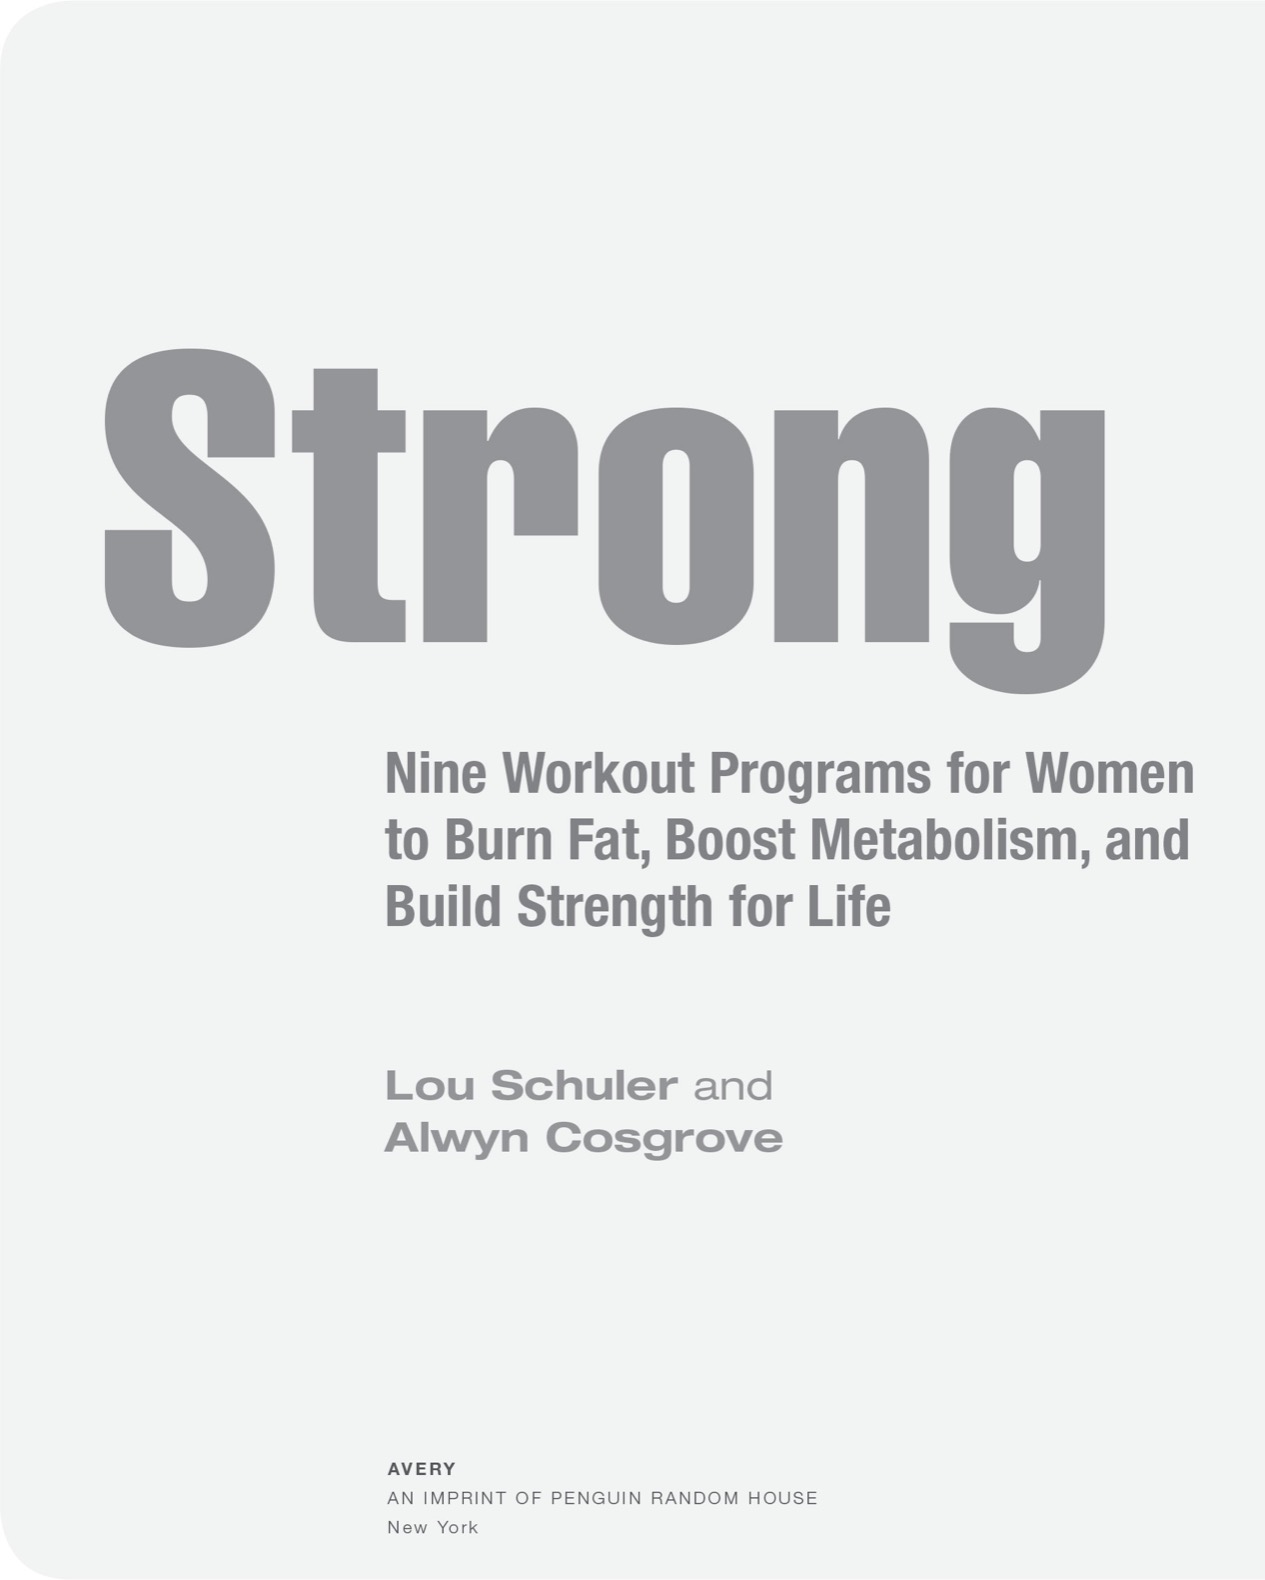 Strong nine workout programs for women to burn fat boost metabolism and build strength for life - image 2